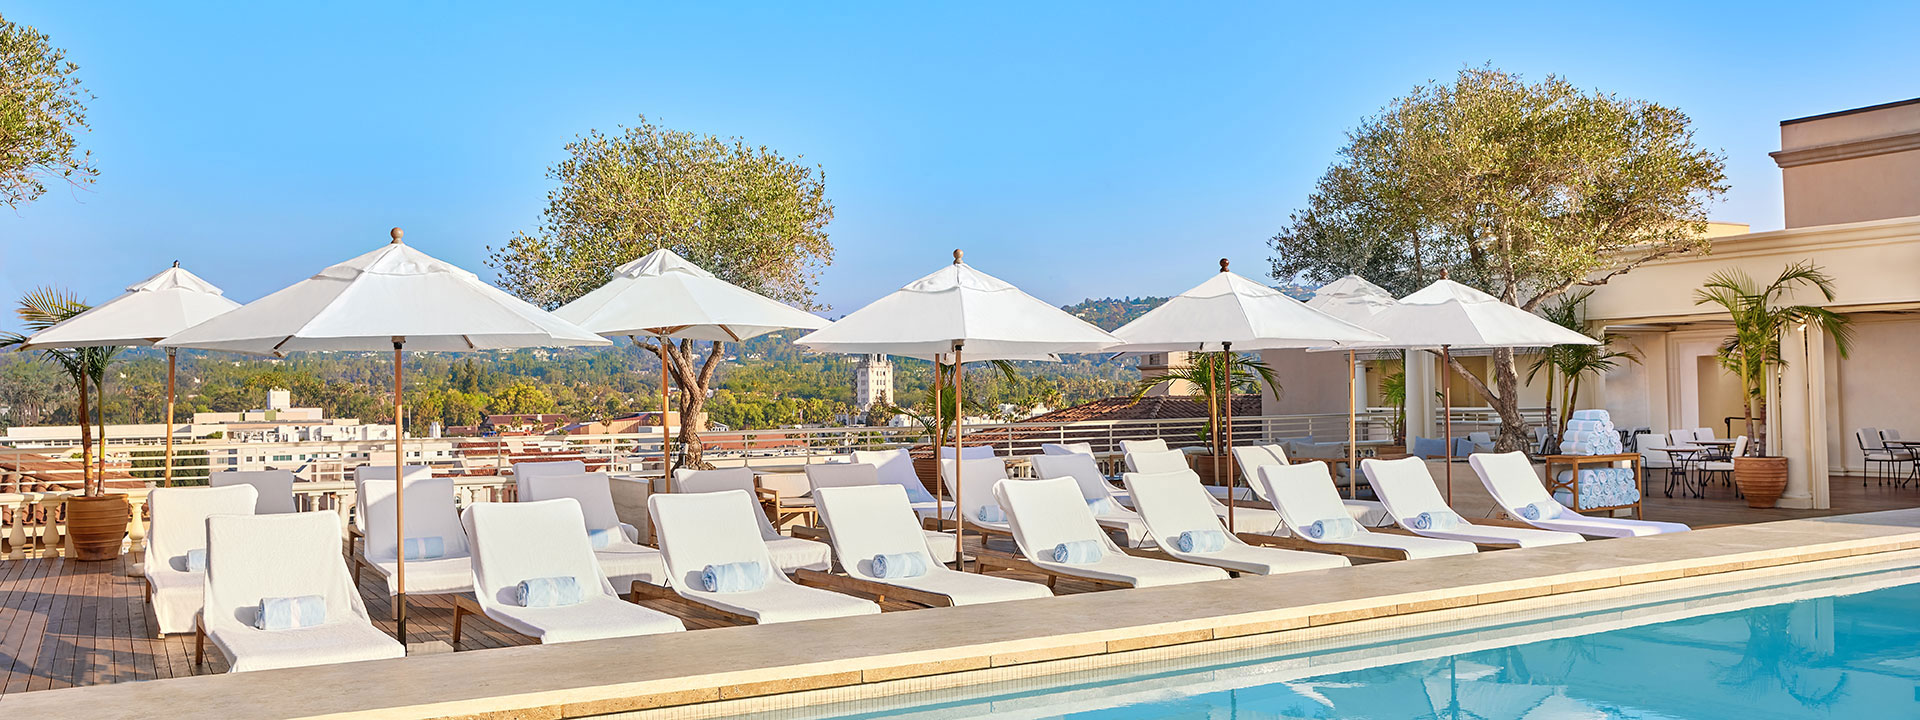 Rows of white sunbeds with parasols in front of the rooftop pool with a view over the L.A skyline